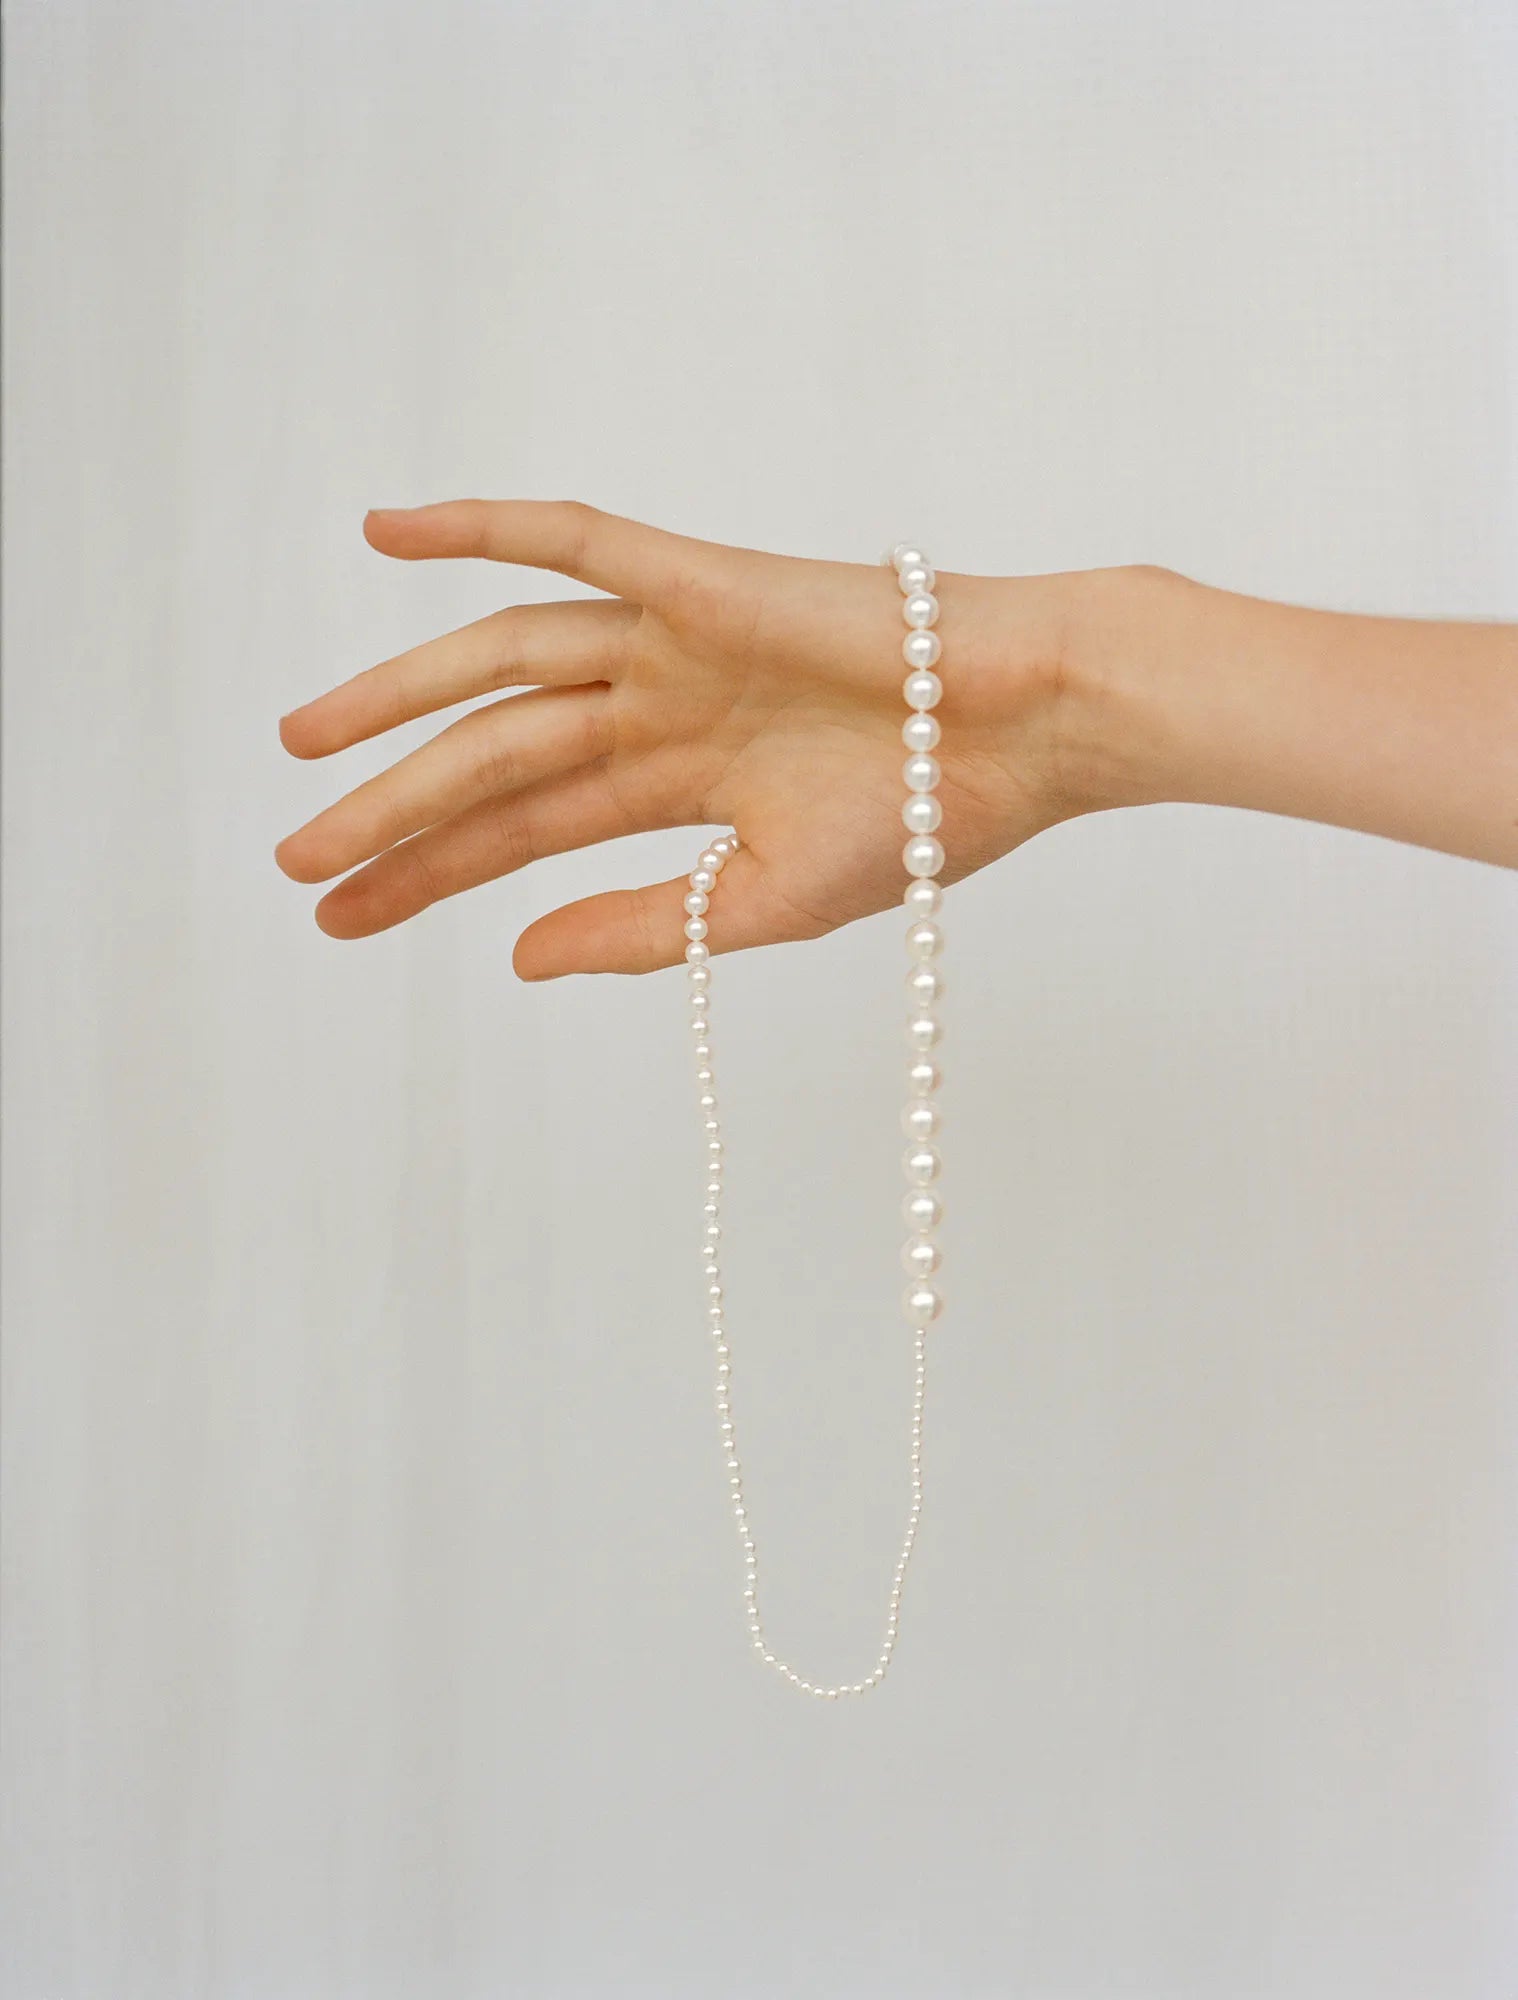 Hand holding Peggy pearl necklace in front of grey background